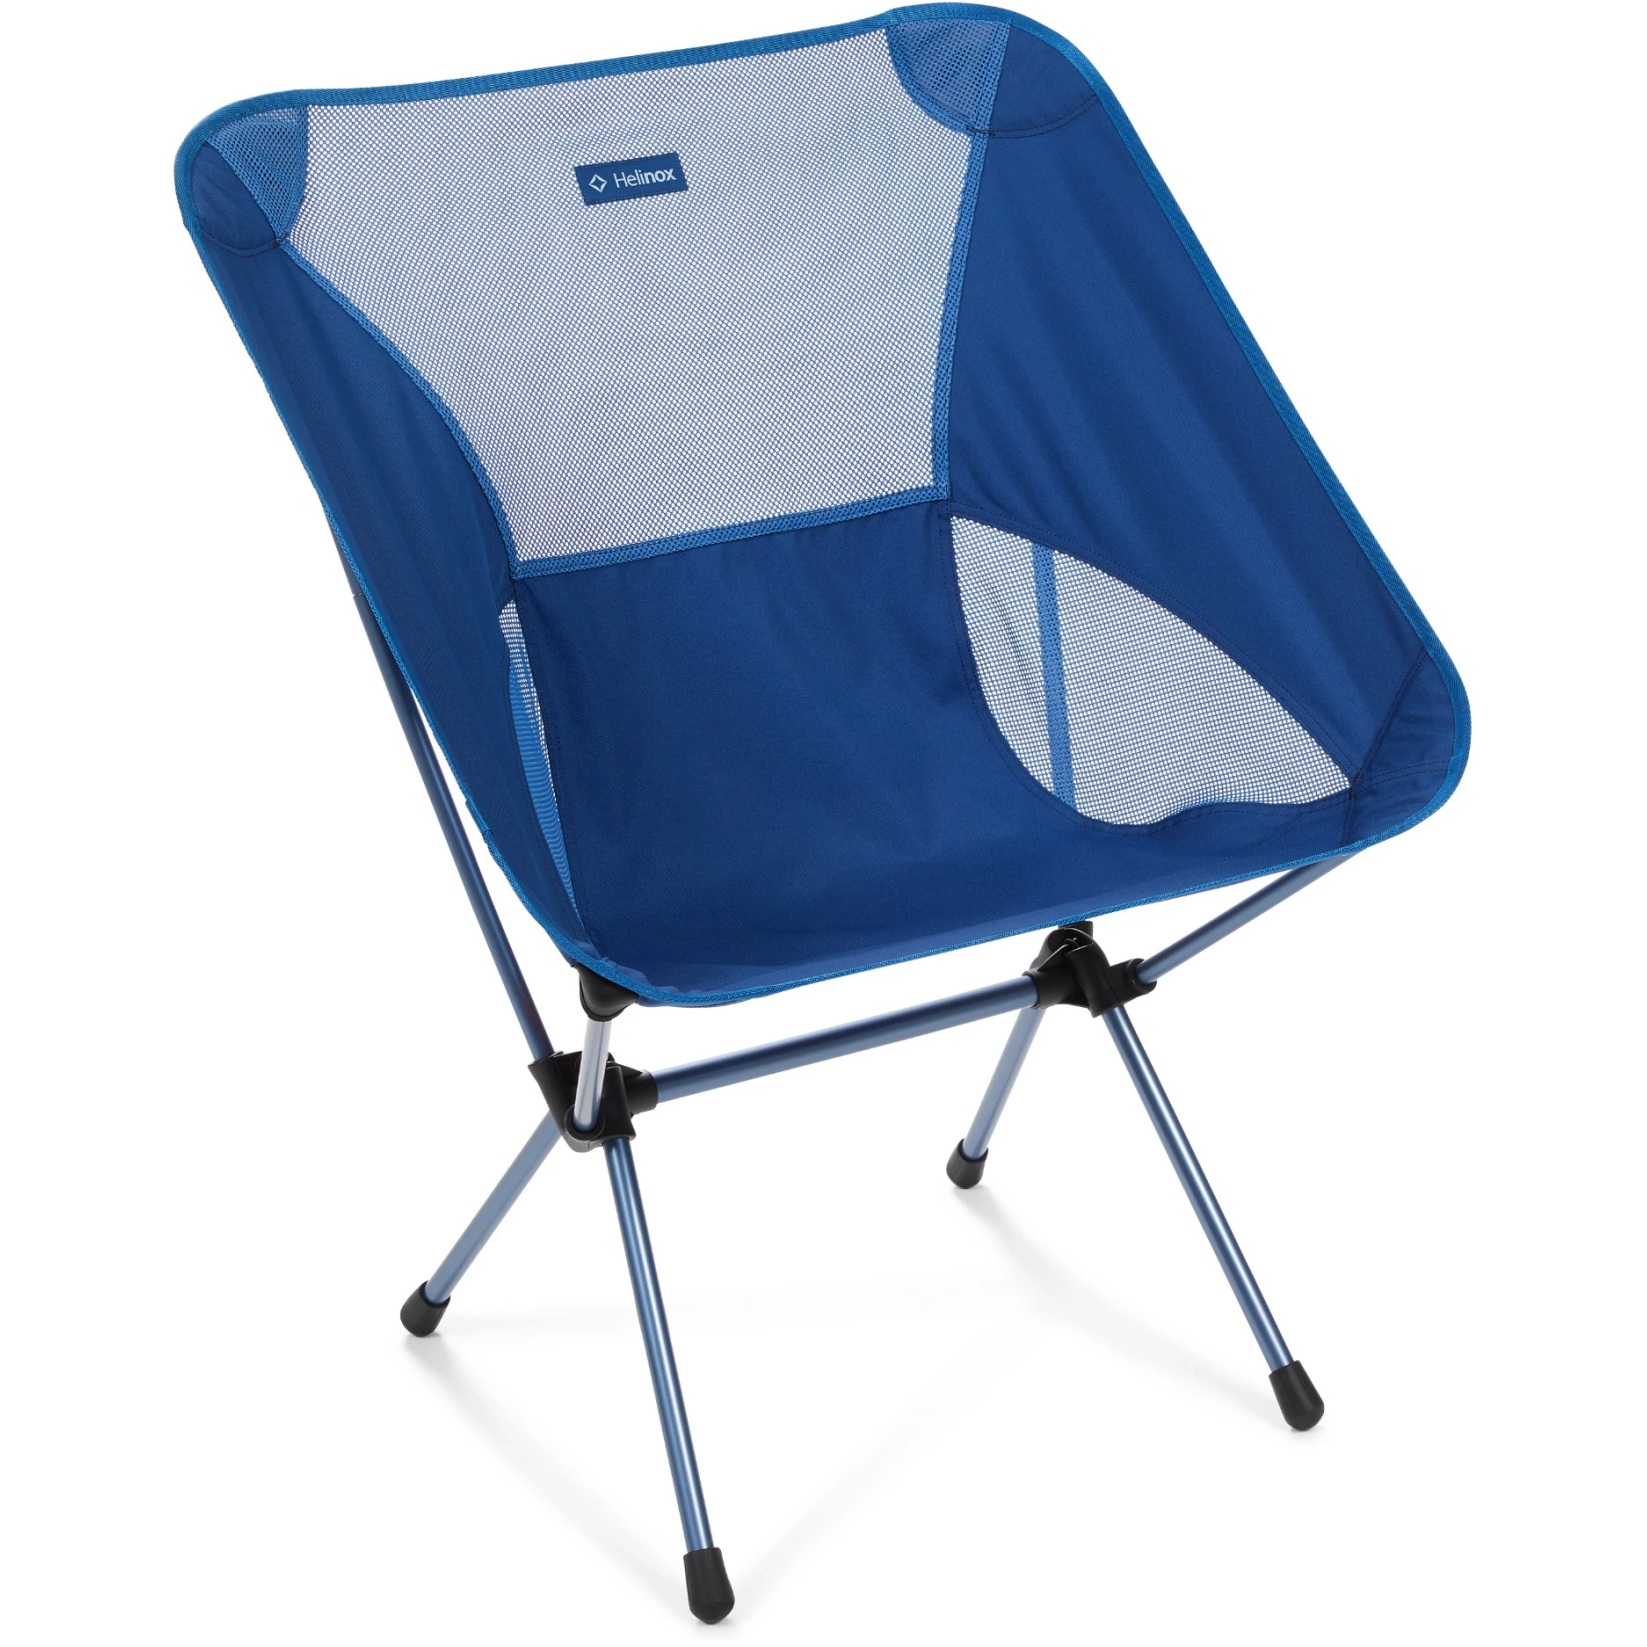 Image of Helinox Chair One XL Camping Chair - blue block - navy